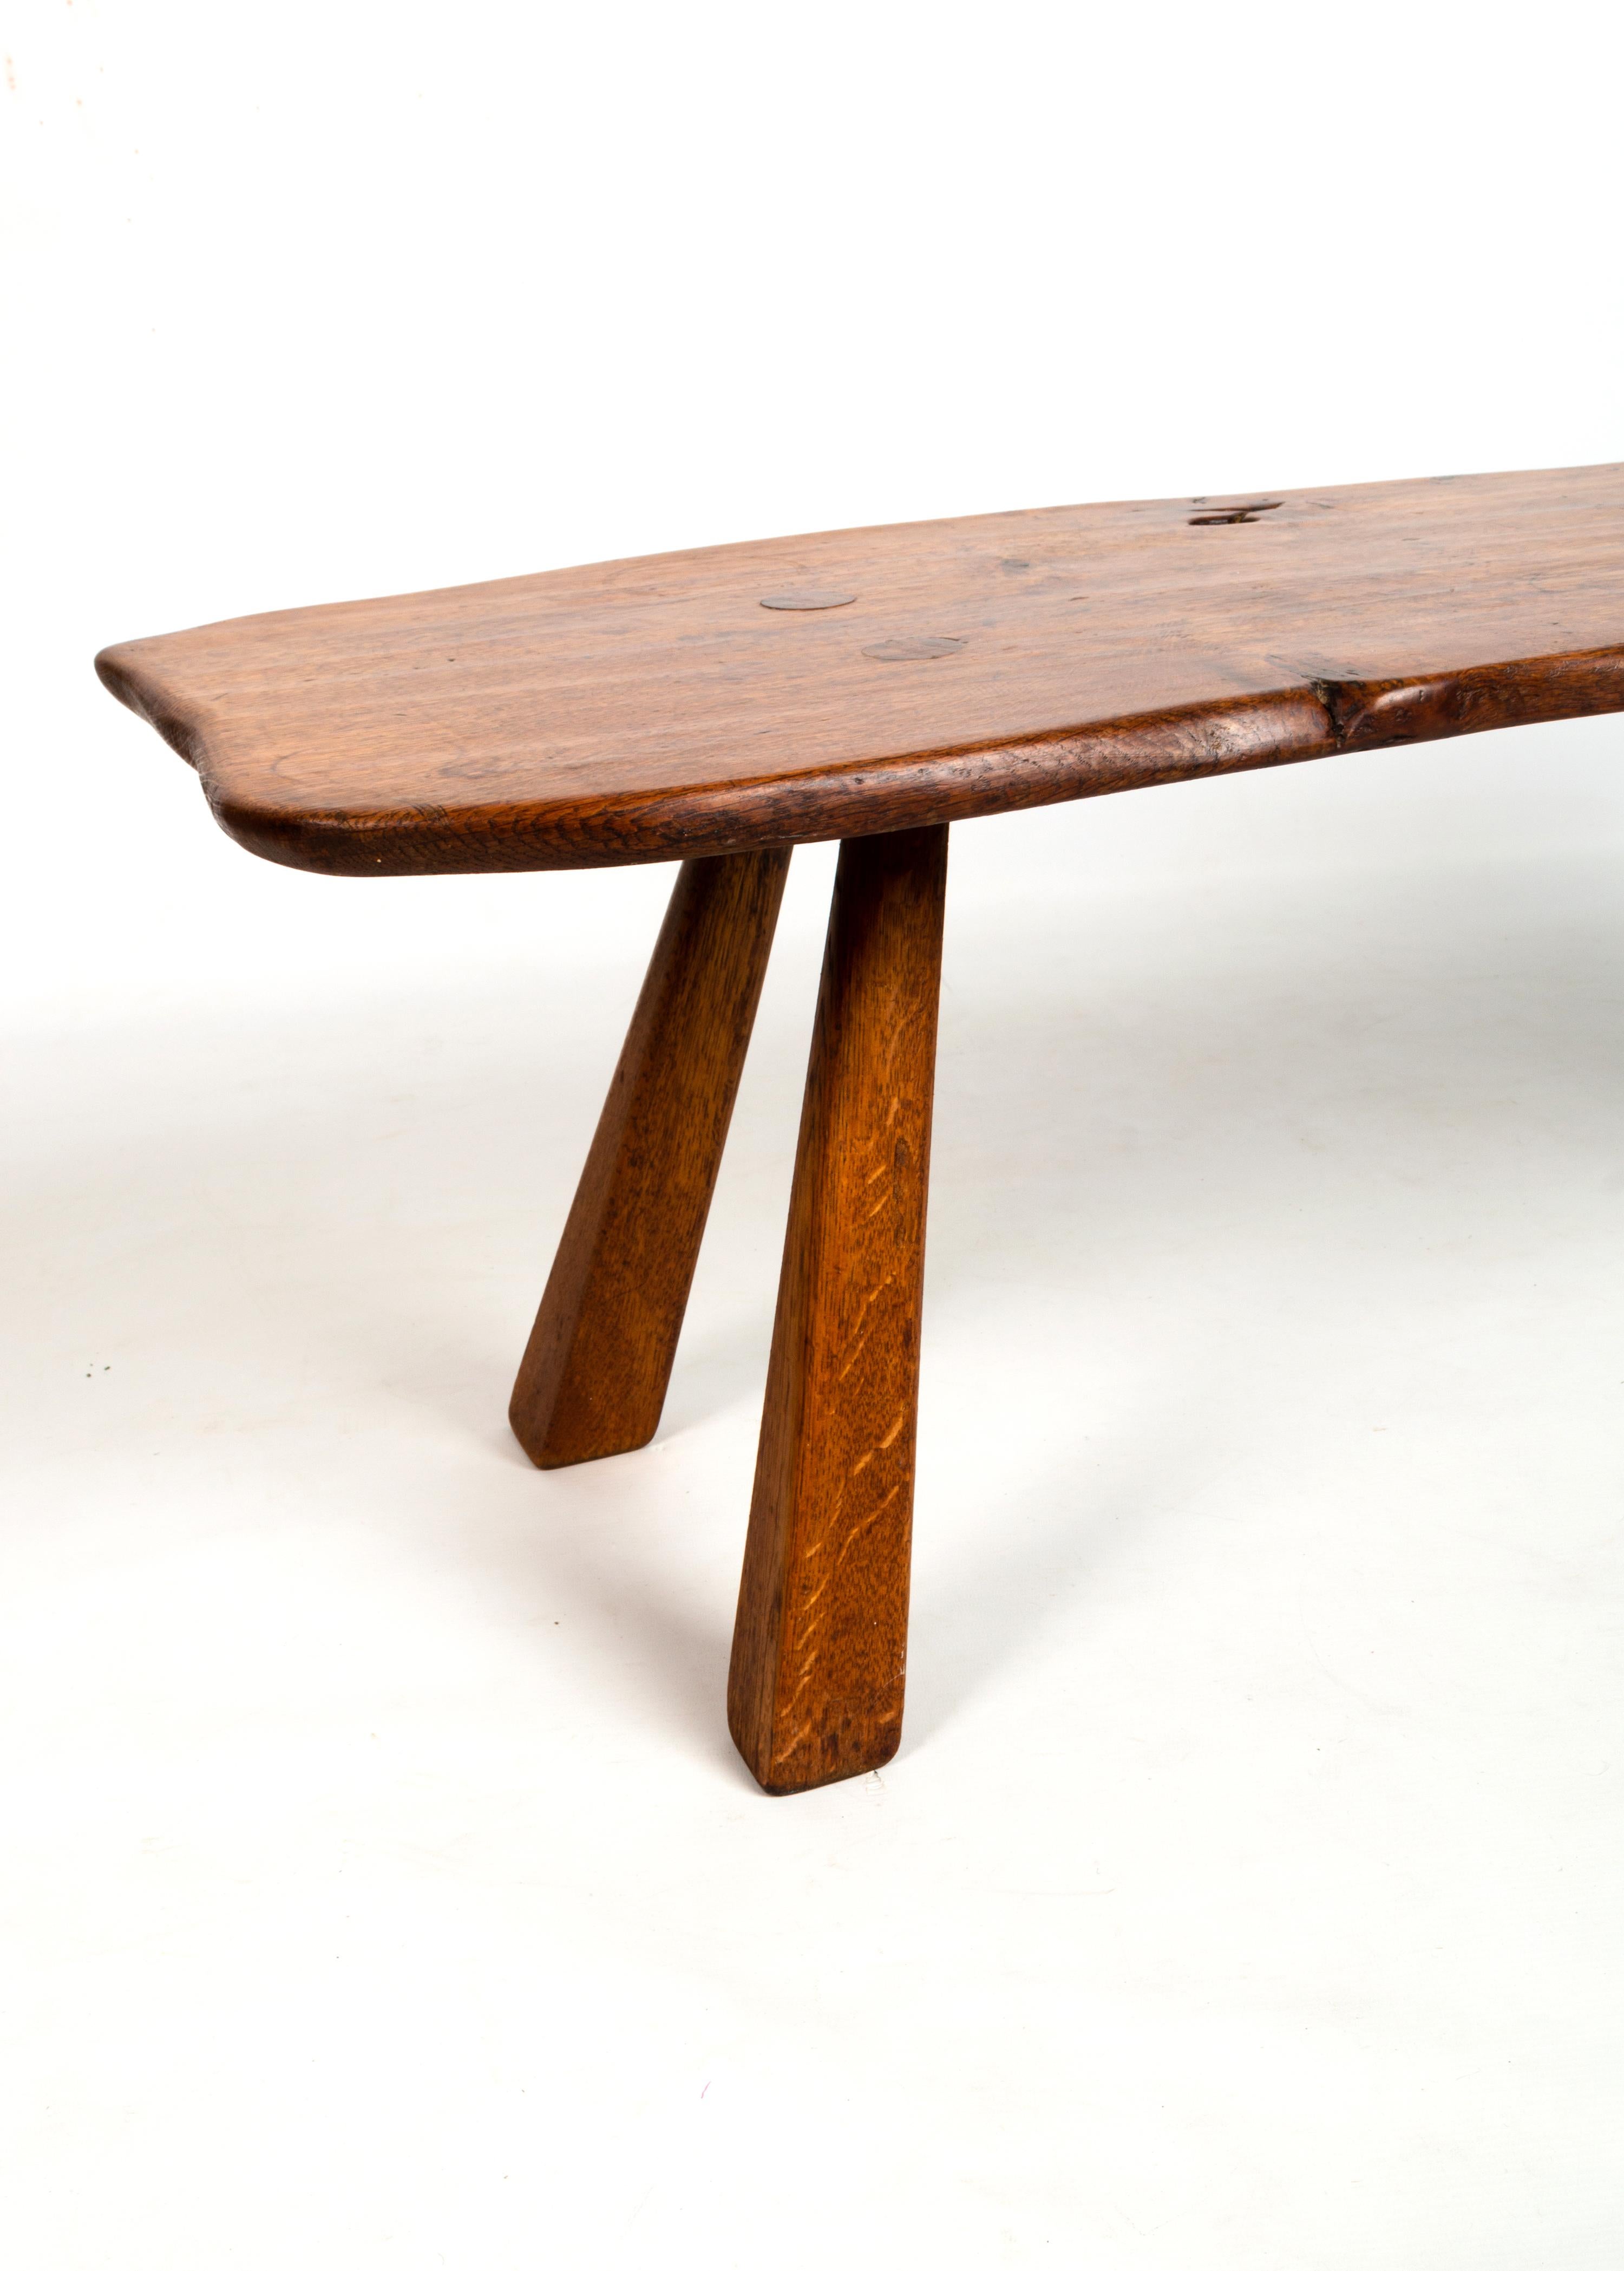  English Arts & Crafts Cotswolds School Oak Bench Coffee Table Console, C.1950 For Sale 1